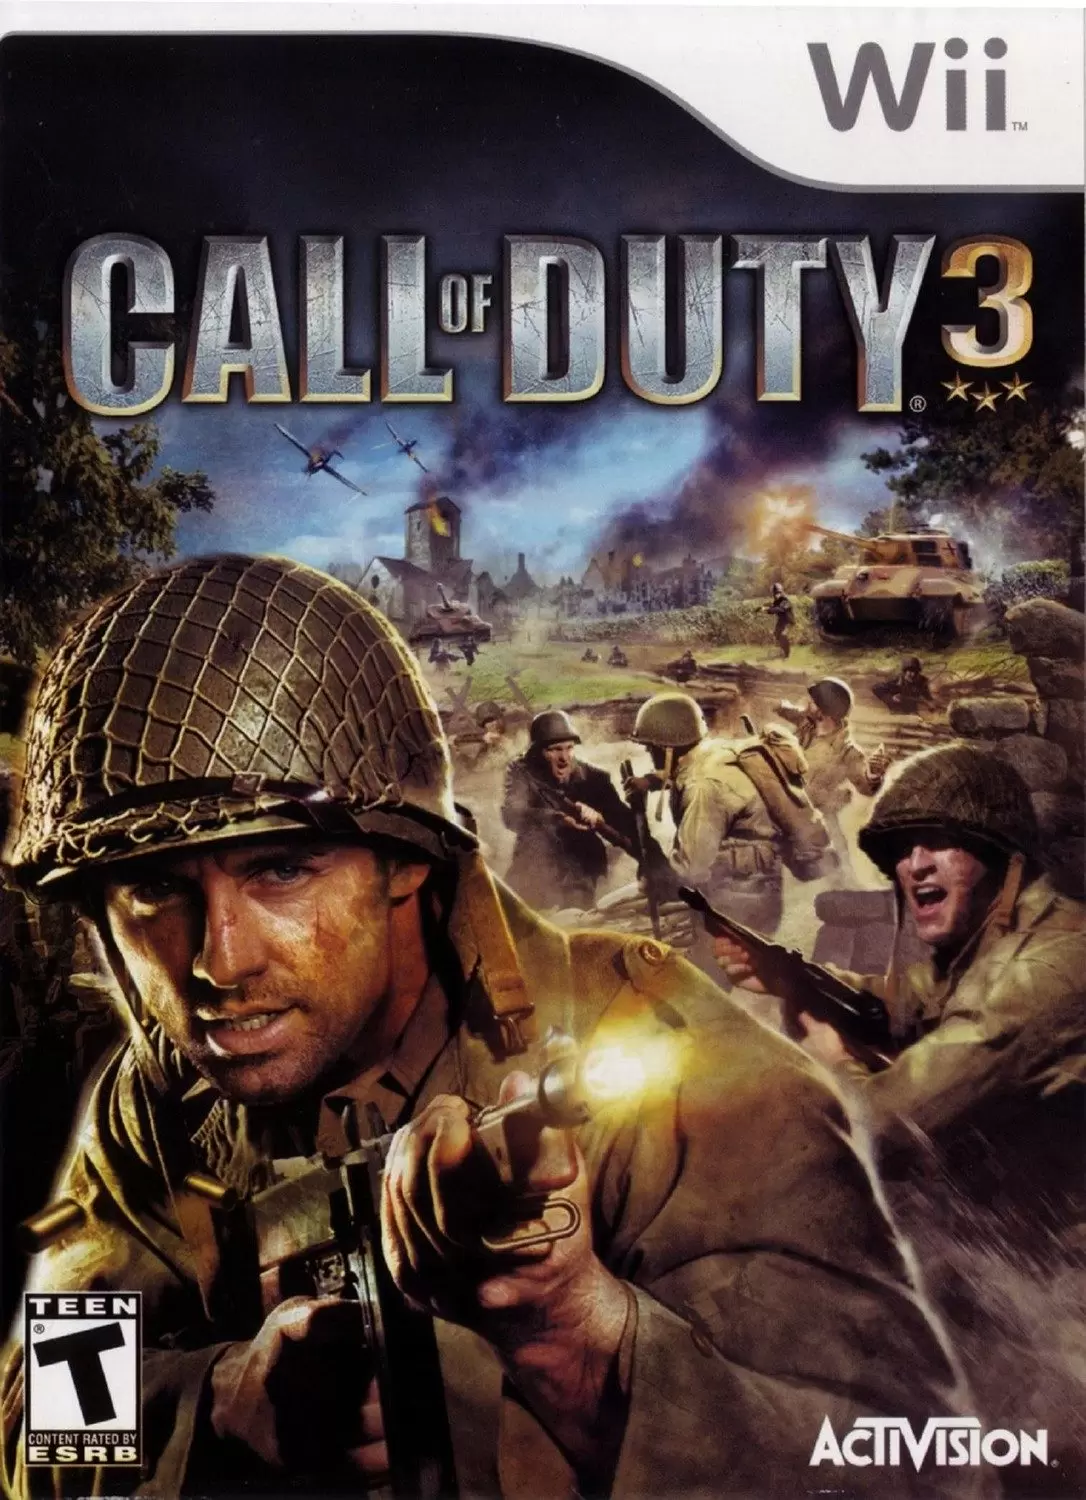 Nintendo Wii Games - Call of Duty 3